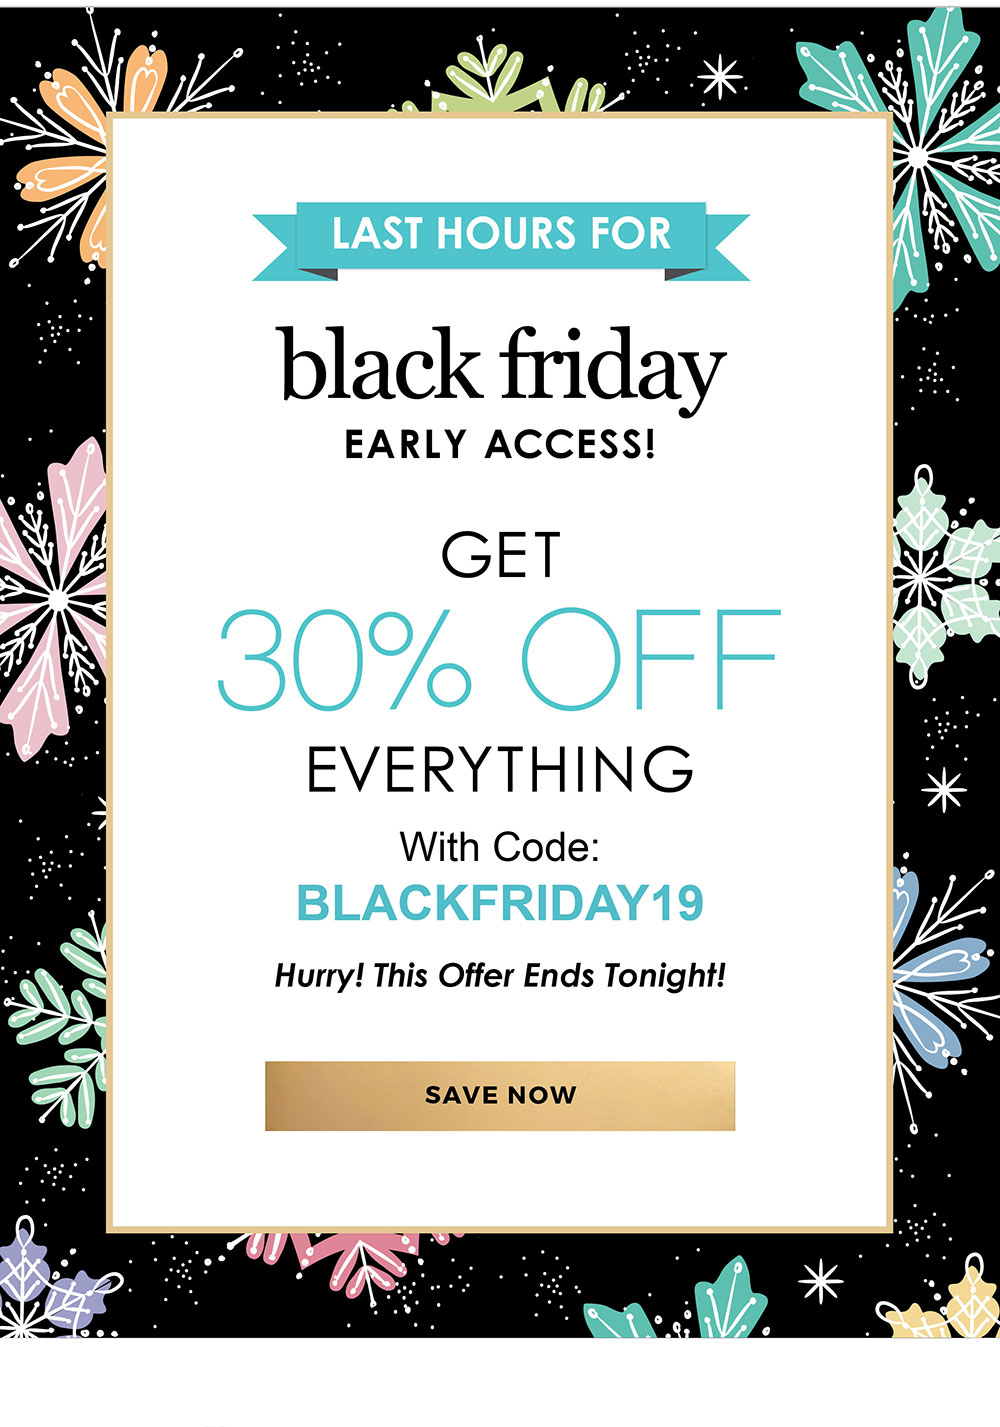 Last Hours for Black Friday Early Access with code BLACKFRIDAY19! >